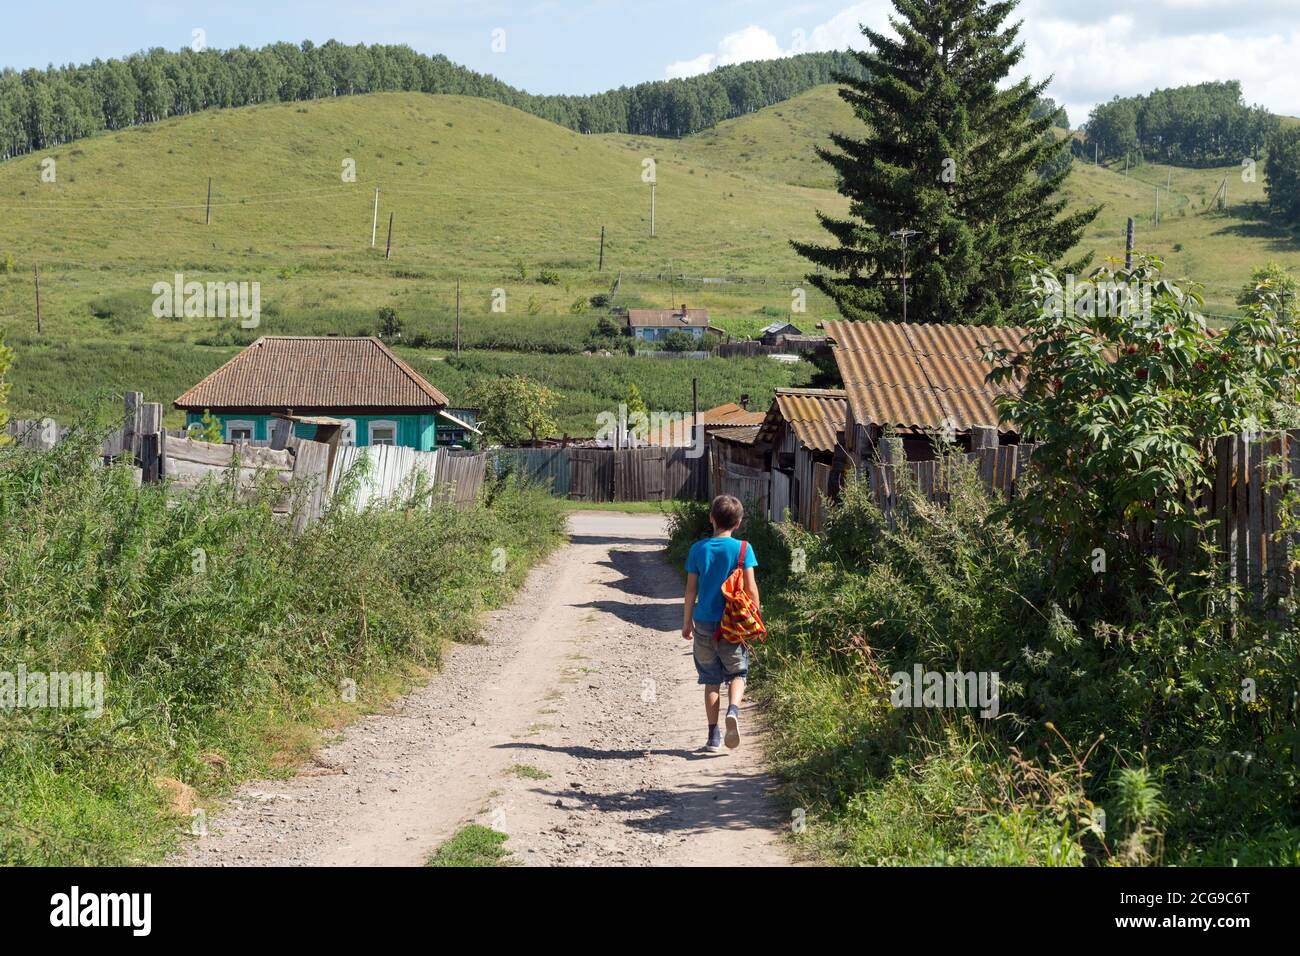 A boy, 12 years old, with a backpack is walking along a dirt road past a wooden fence in the village on a summer sunny day. Stock Photo